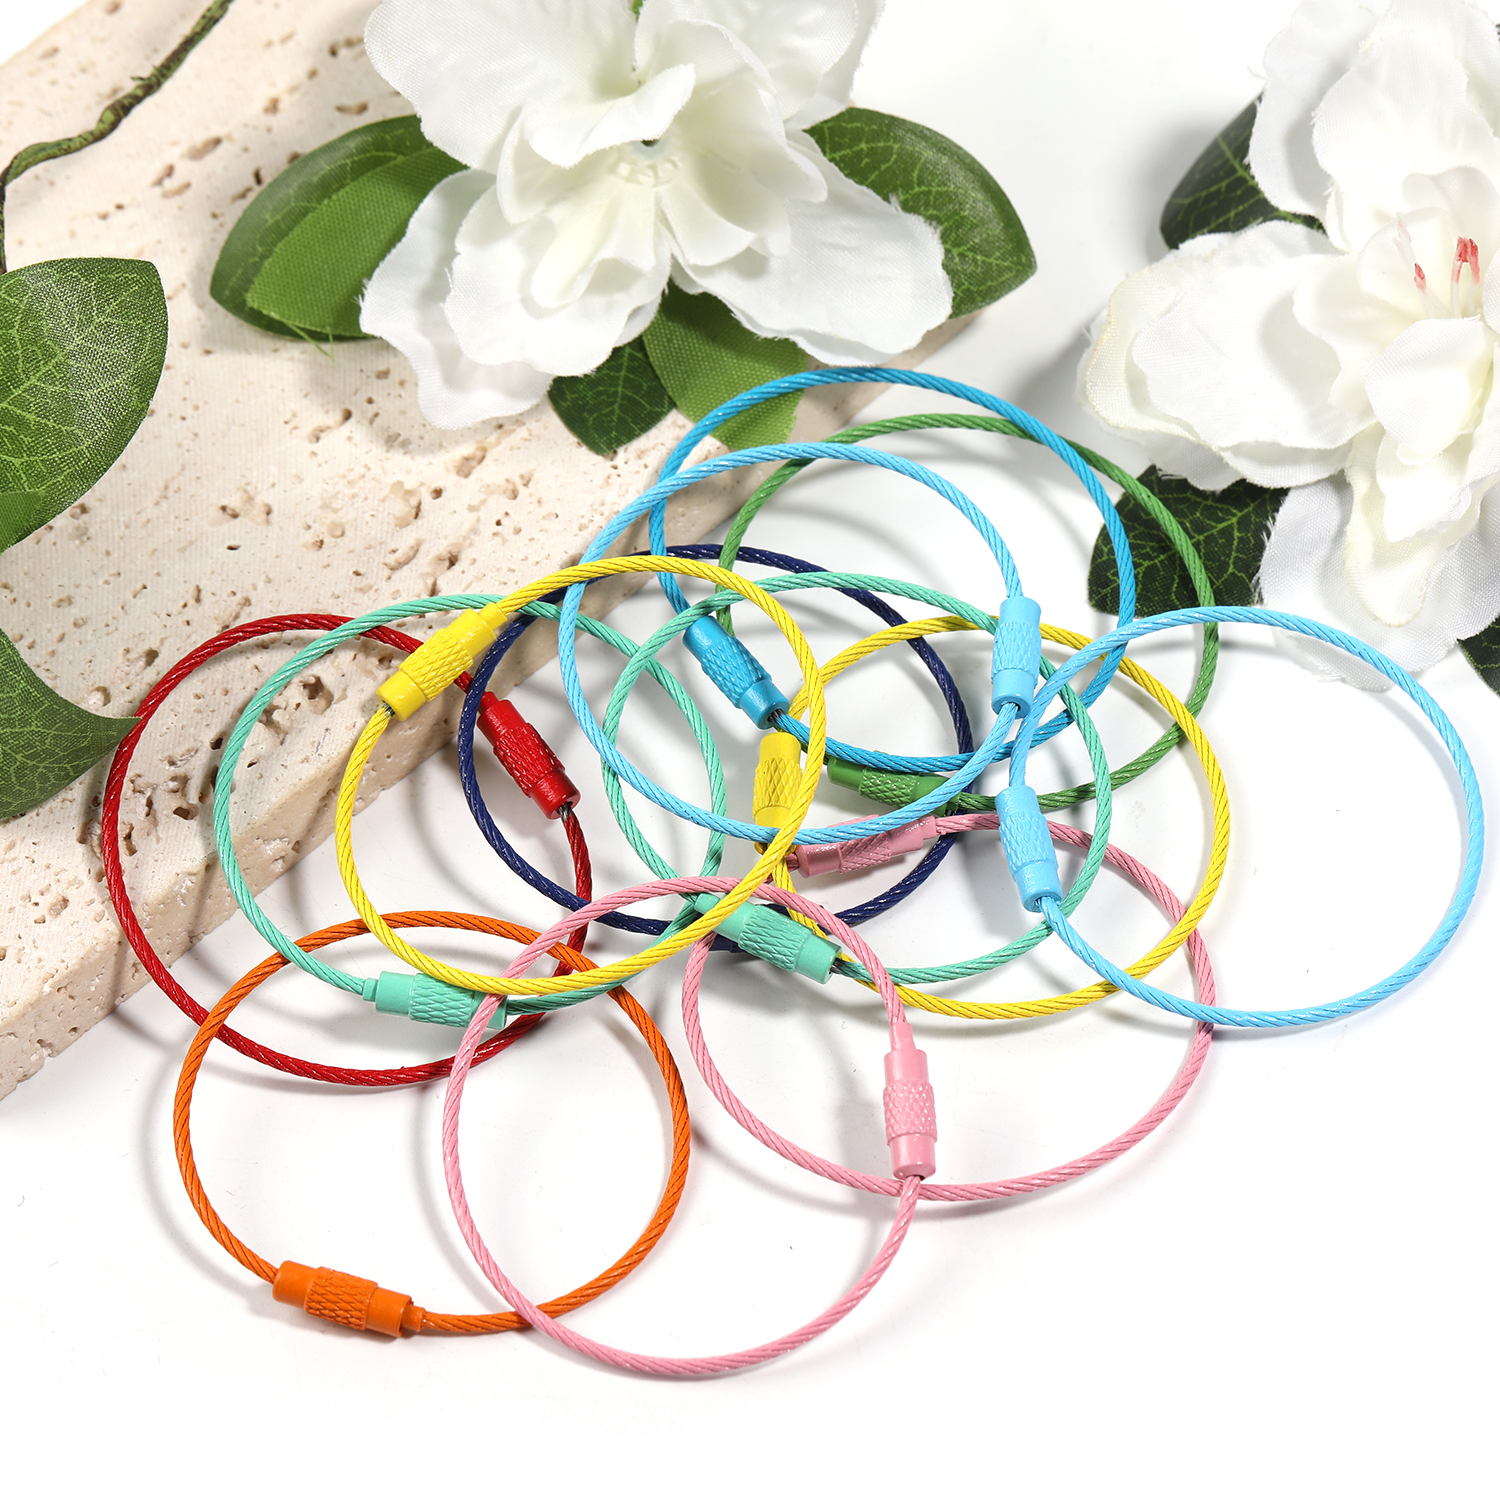 【A2】20Pcs Multi Color Stainless Steel Wire Keychain Cable Key Ring Loop Assorted Colored Keychain -JPM